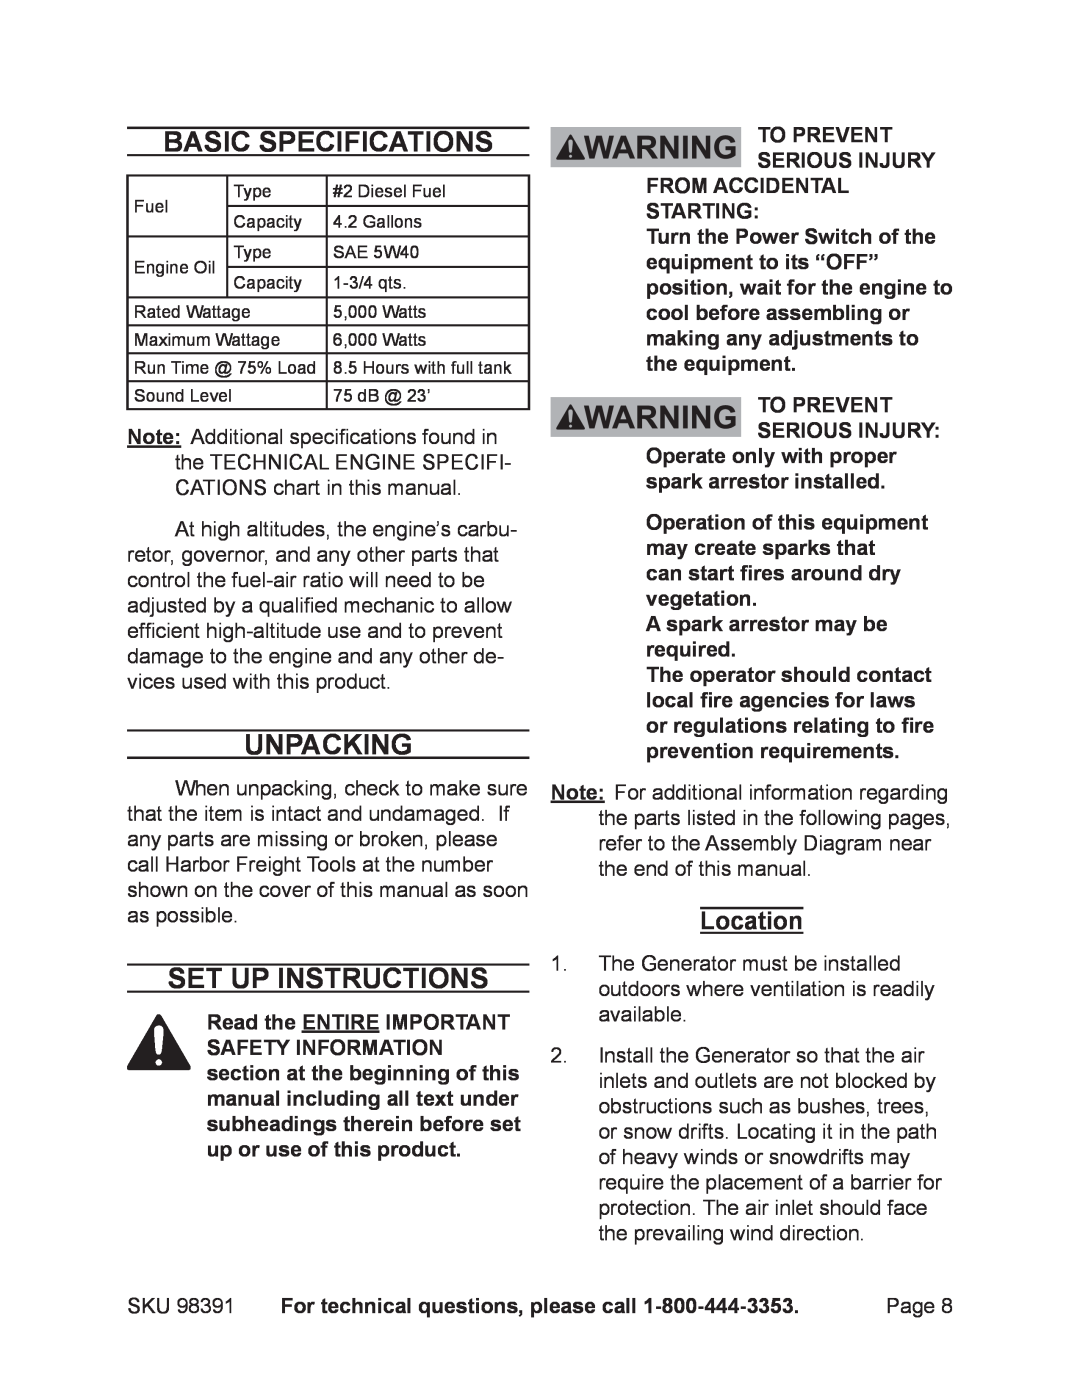 Chicago Electric 98391 manual Basic Specifications, Unpacking, Set Up Instructions, To prevent serious injury 